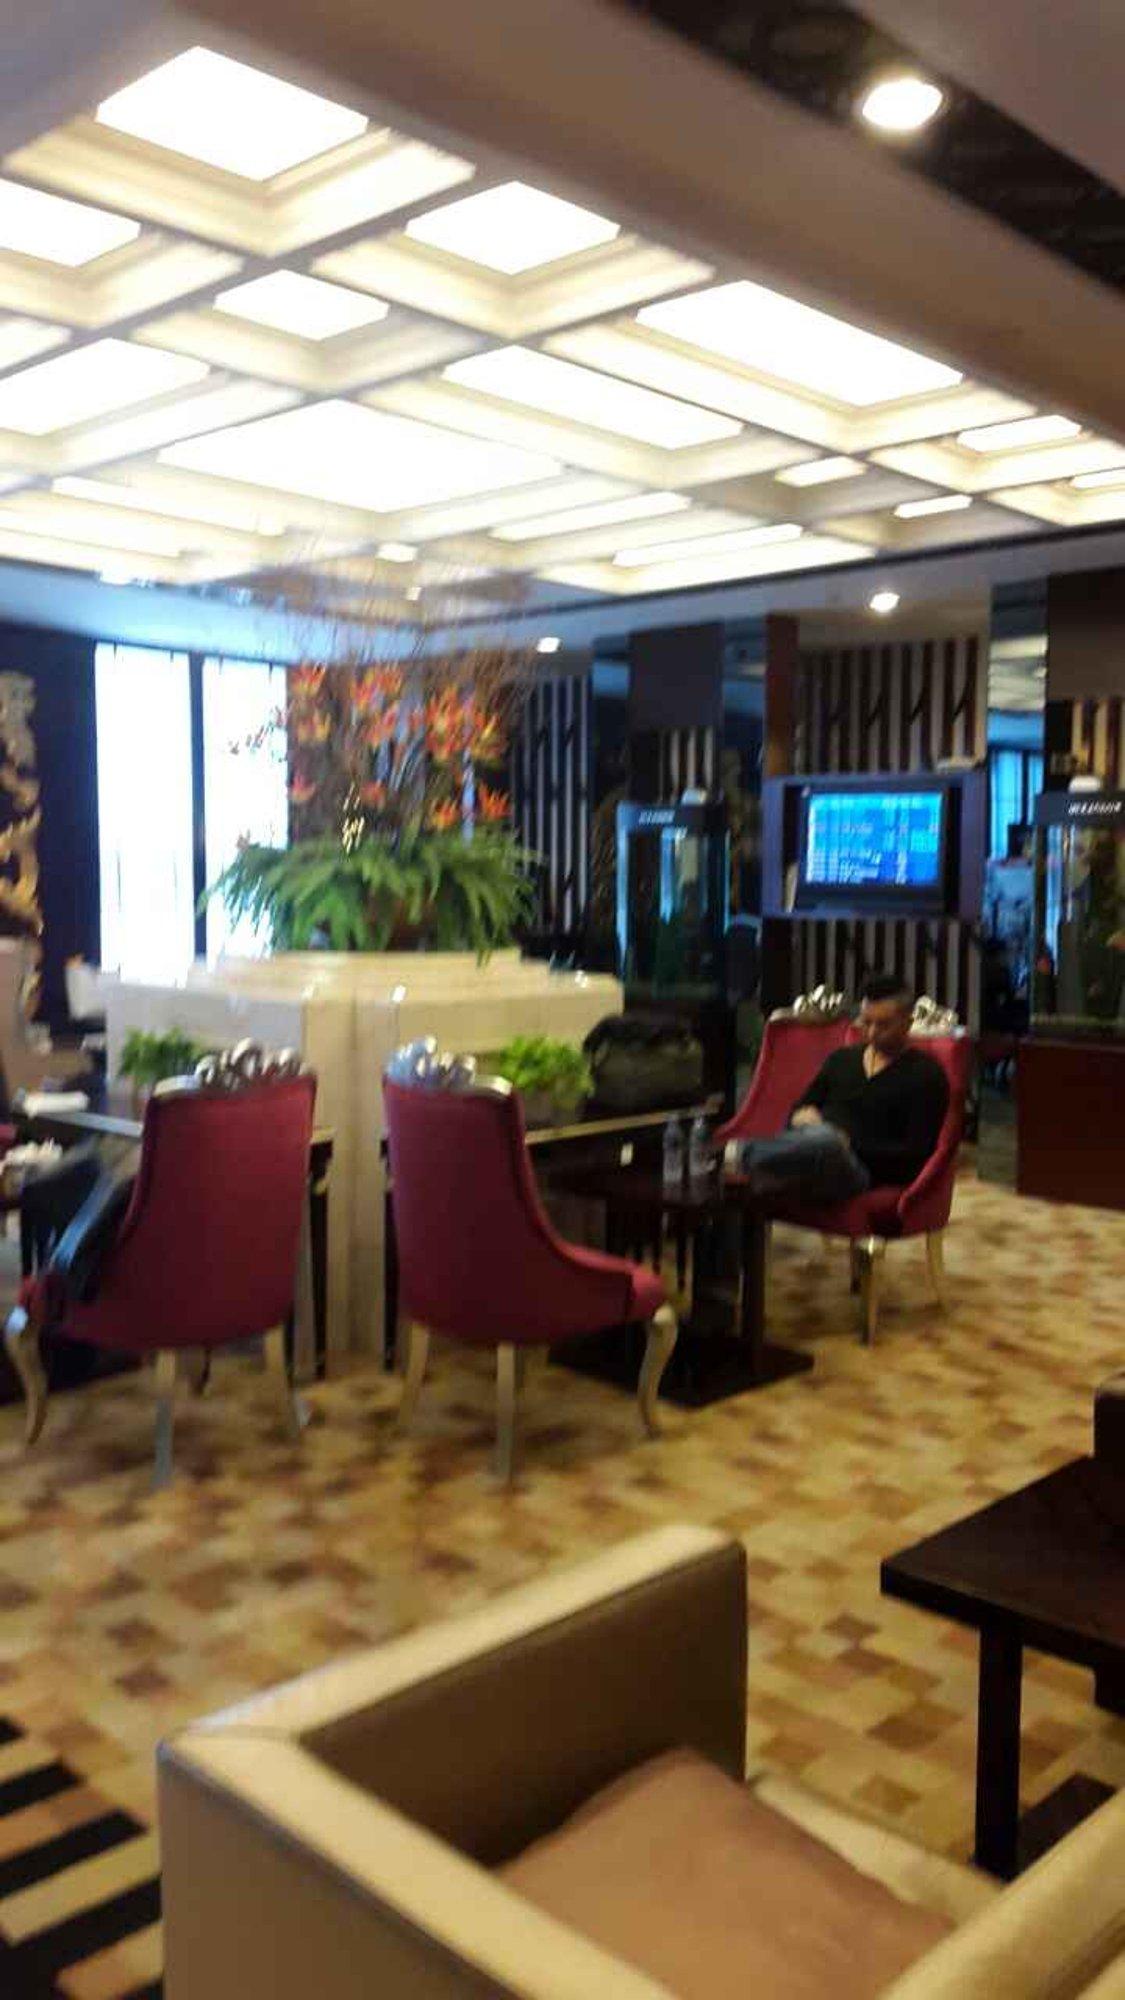 China Eastern First Class Lounge image 7 of 10